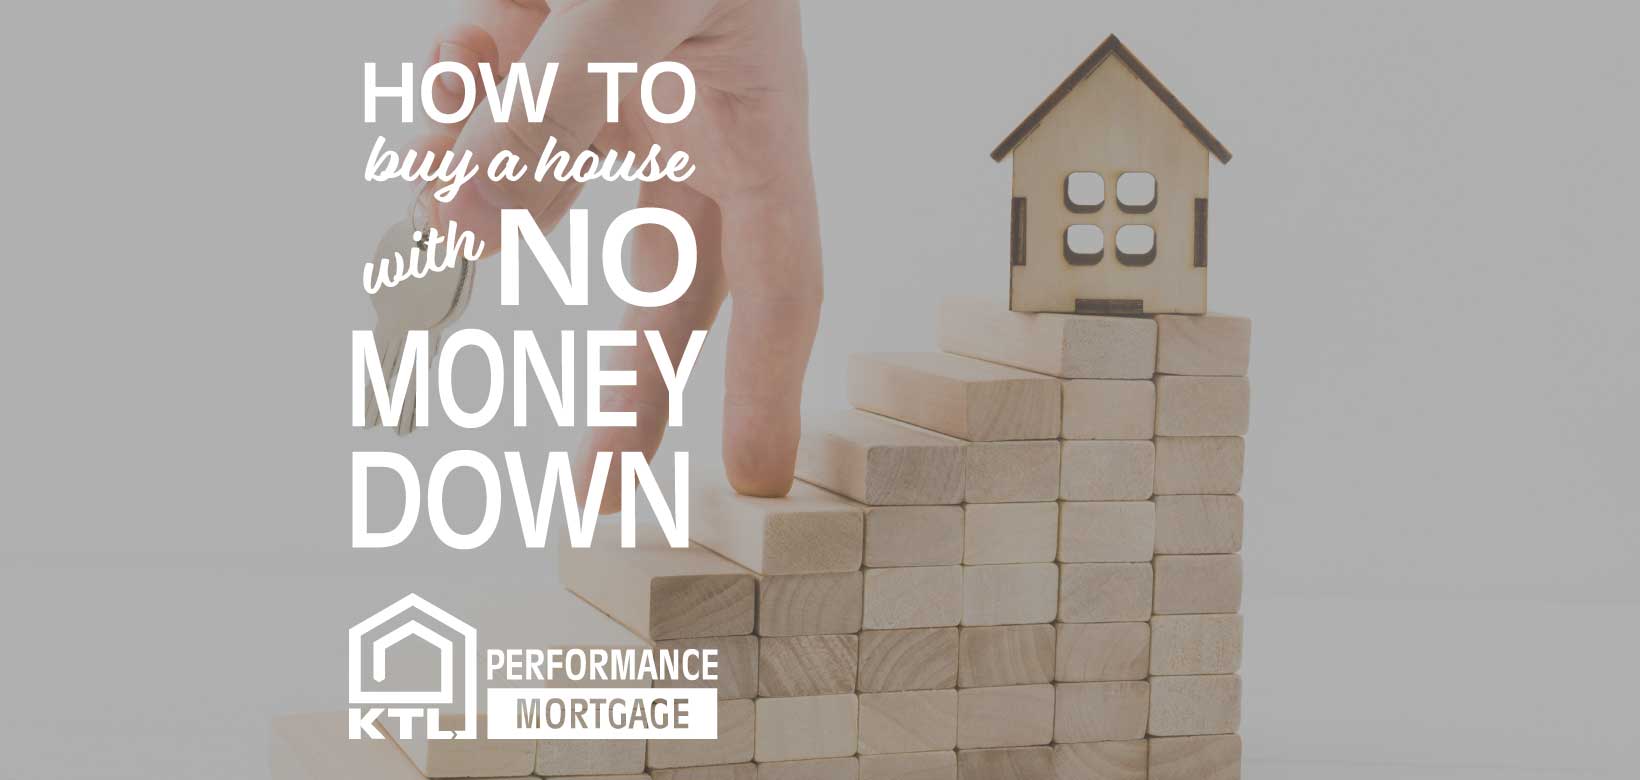 How-to-buy-a-house-with-no-money-down